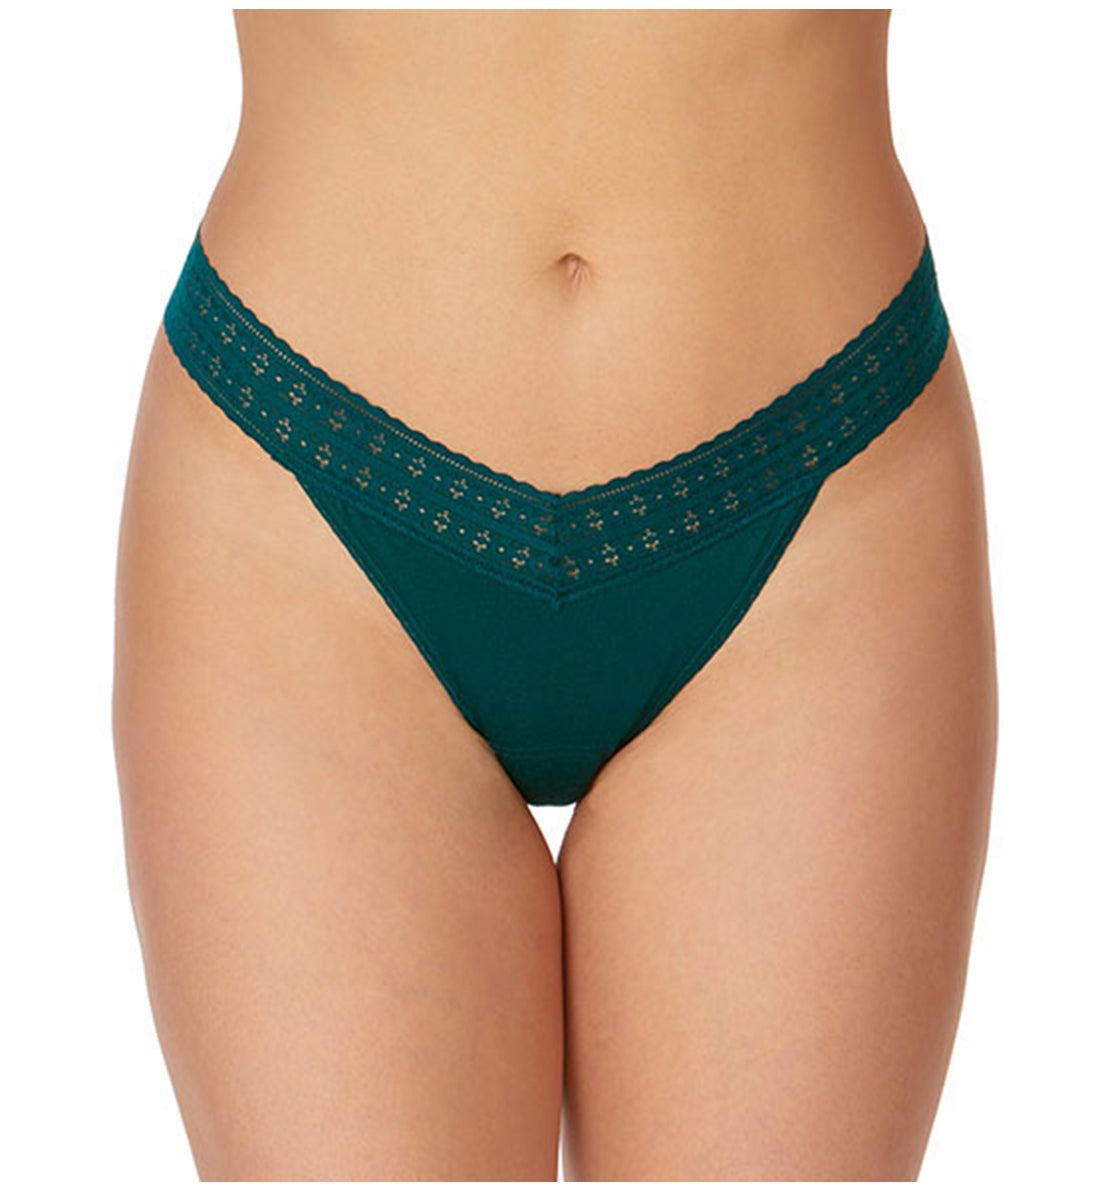 Hanky Panky DreamEase Original Rise Thong (631104),Ivy - Ivy,One Size